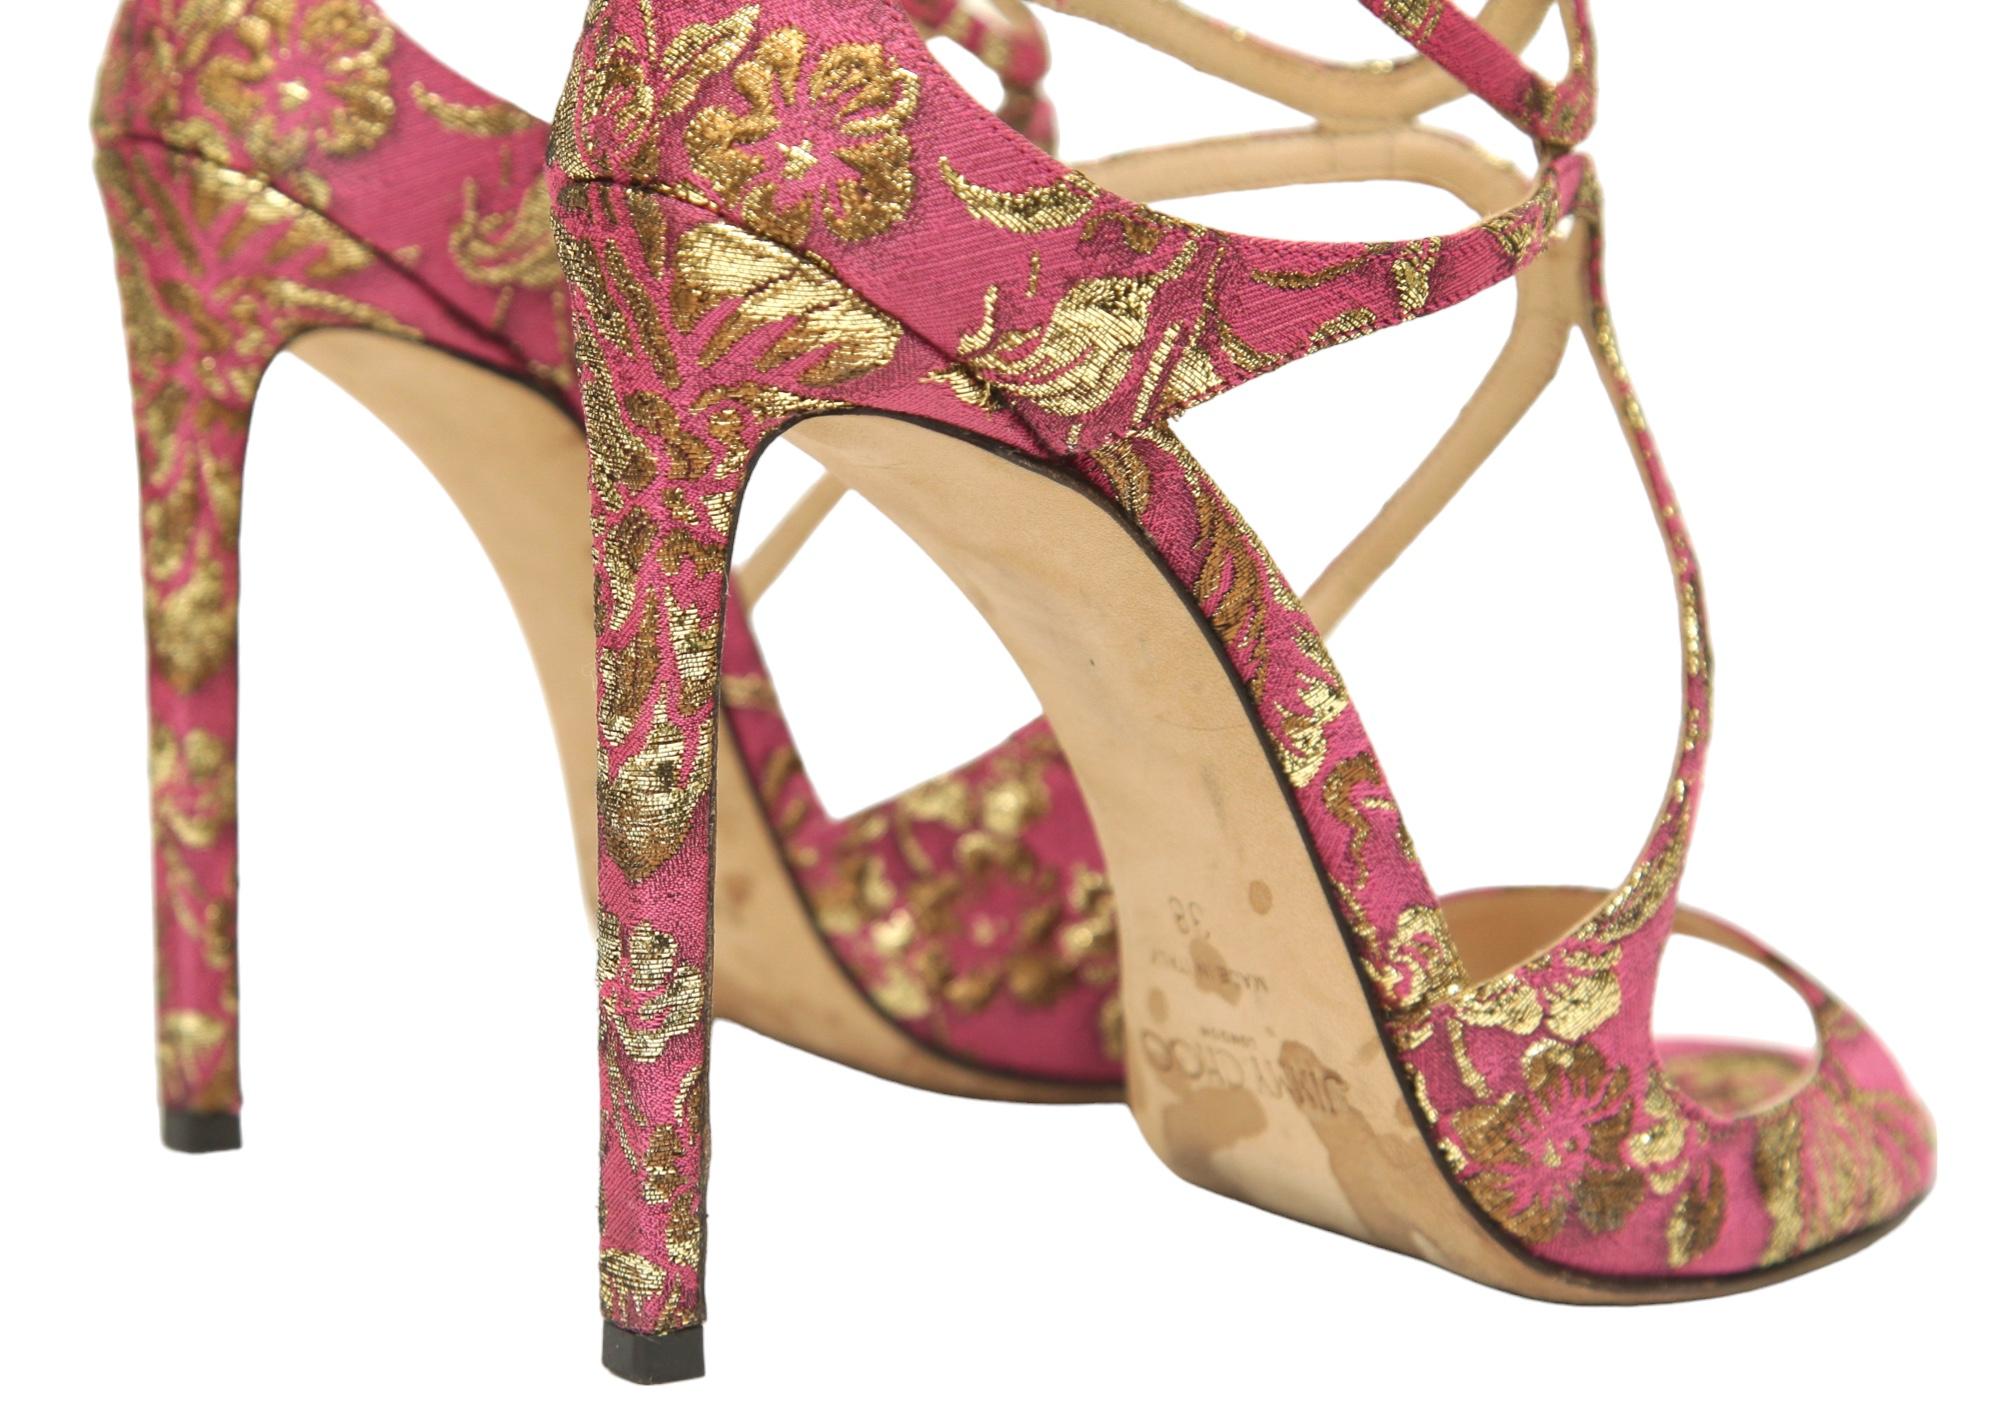 JIMMY CHOO Sandals Brocade Pink Gold Metallic LANCER Heels Leather Strappy 38 For Sale 1